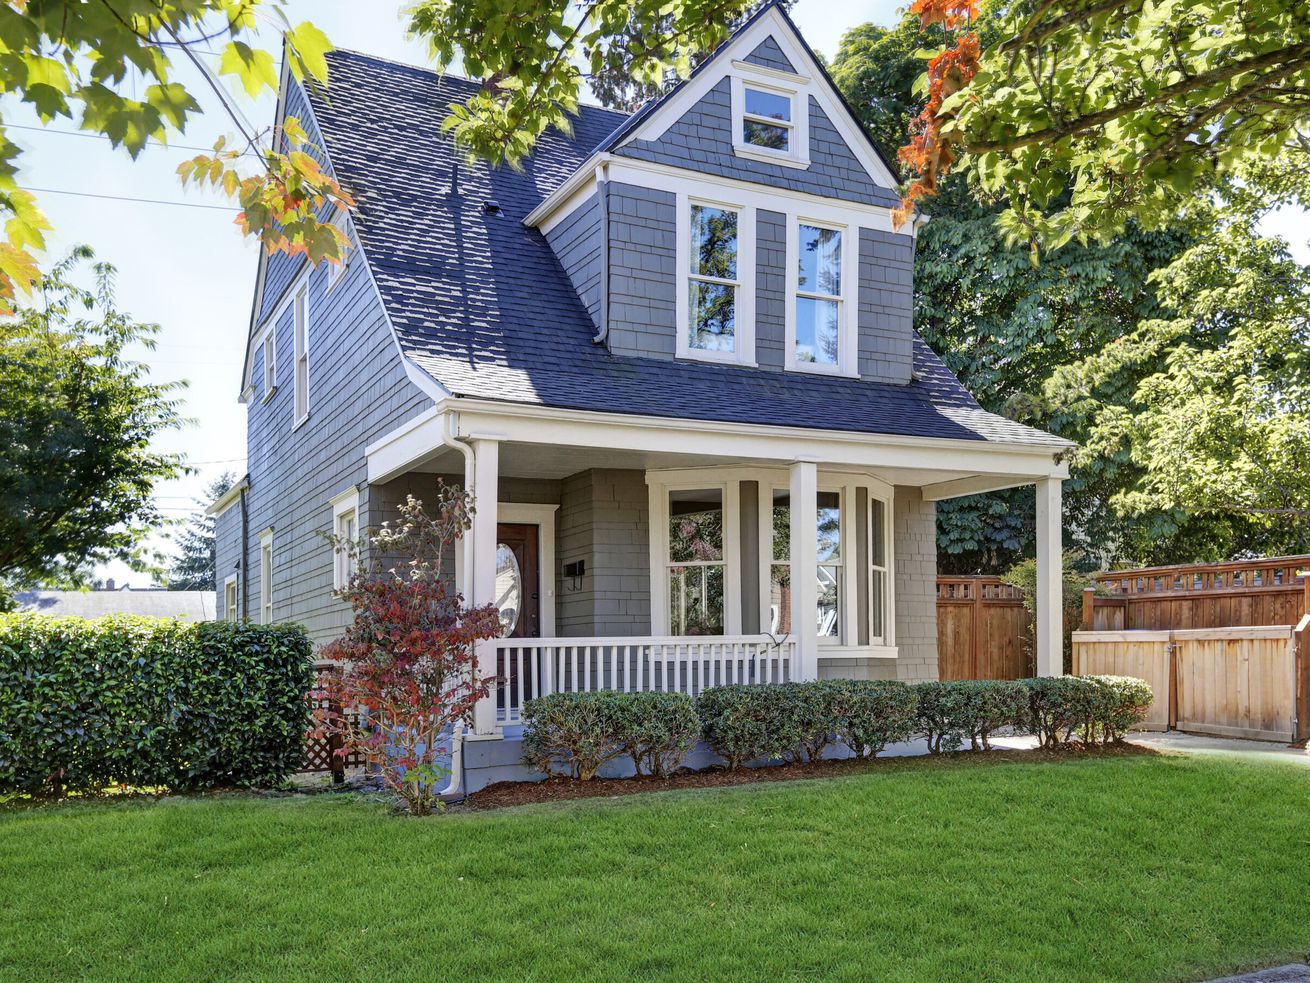 A grey-blue home with a large front porch, large green front yard, and several green shrubs.